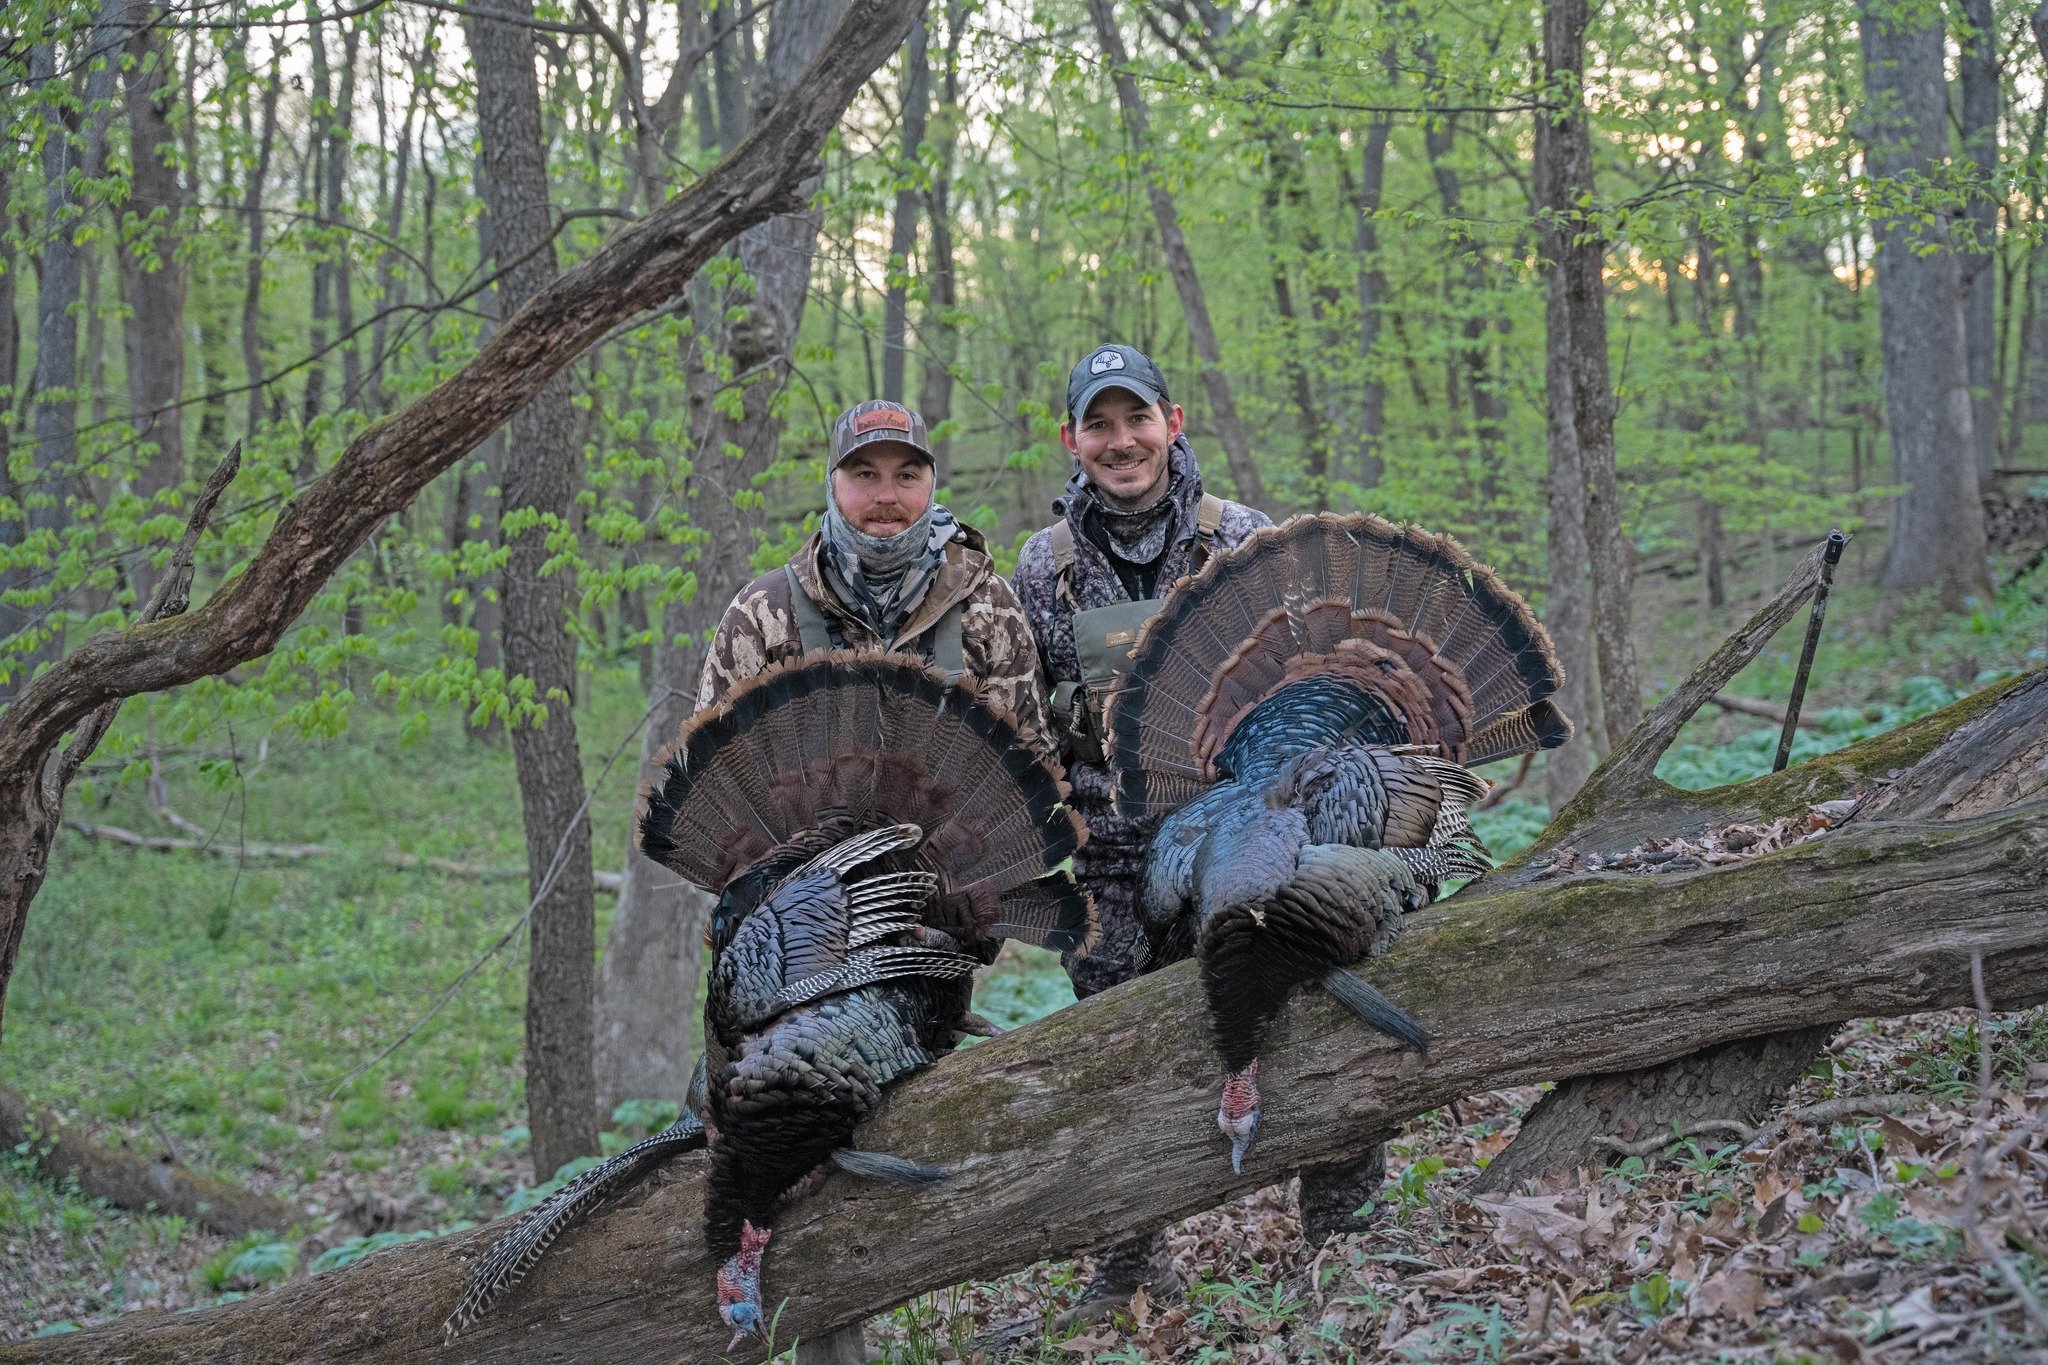 Turkey hunting dreams turned into reality this weekend after @walkcb pinned down a bunch of birds using @onxhunt ! 4 Toms and 4 Jakes with no hens right off the roost made for an epic hunt and a quick double-up. Tagged out by 6:30am while making unfo